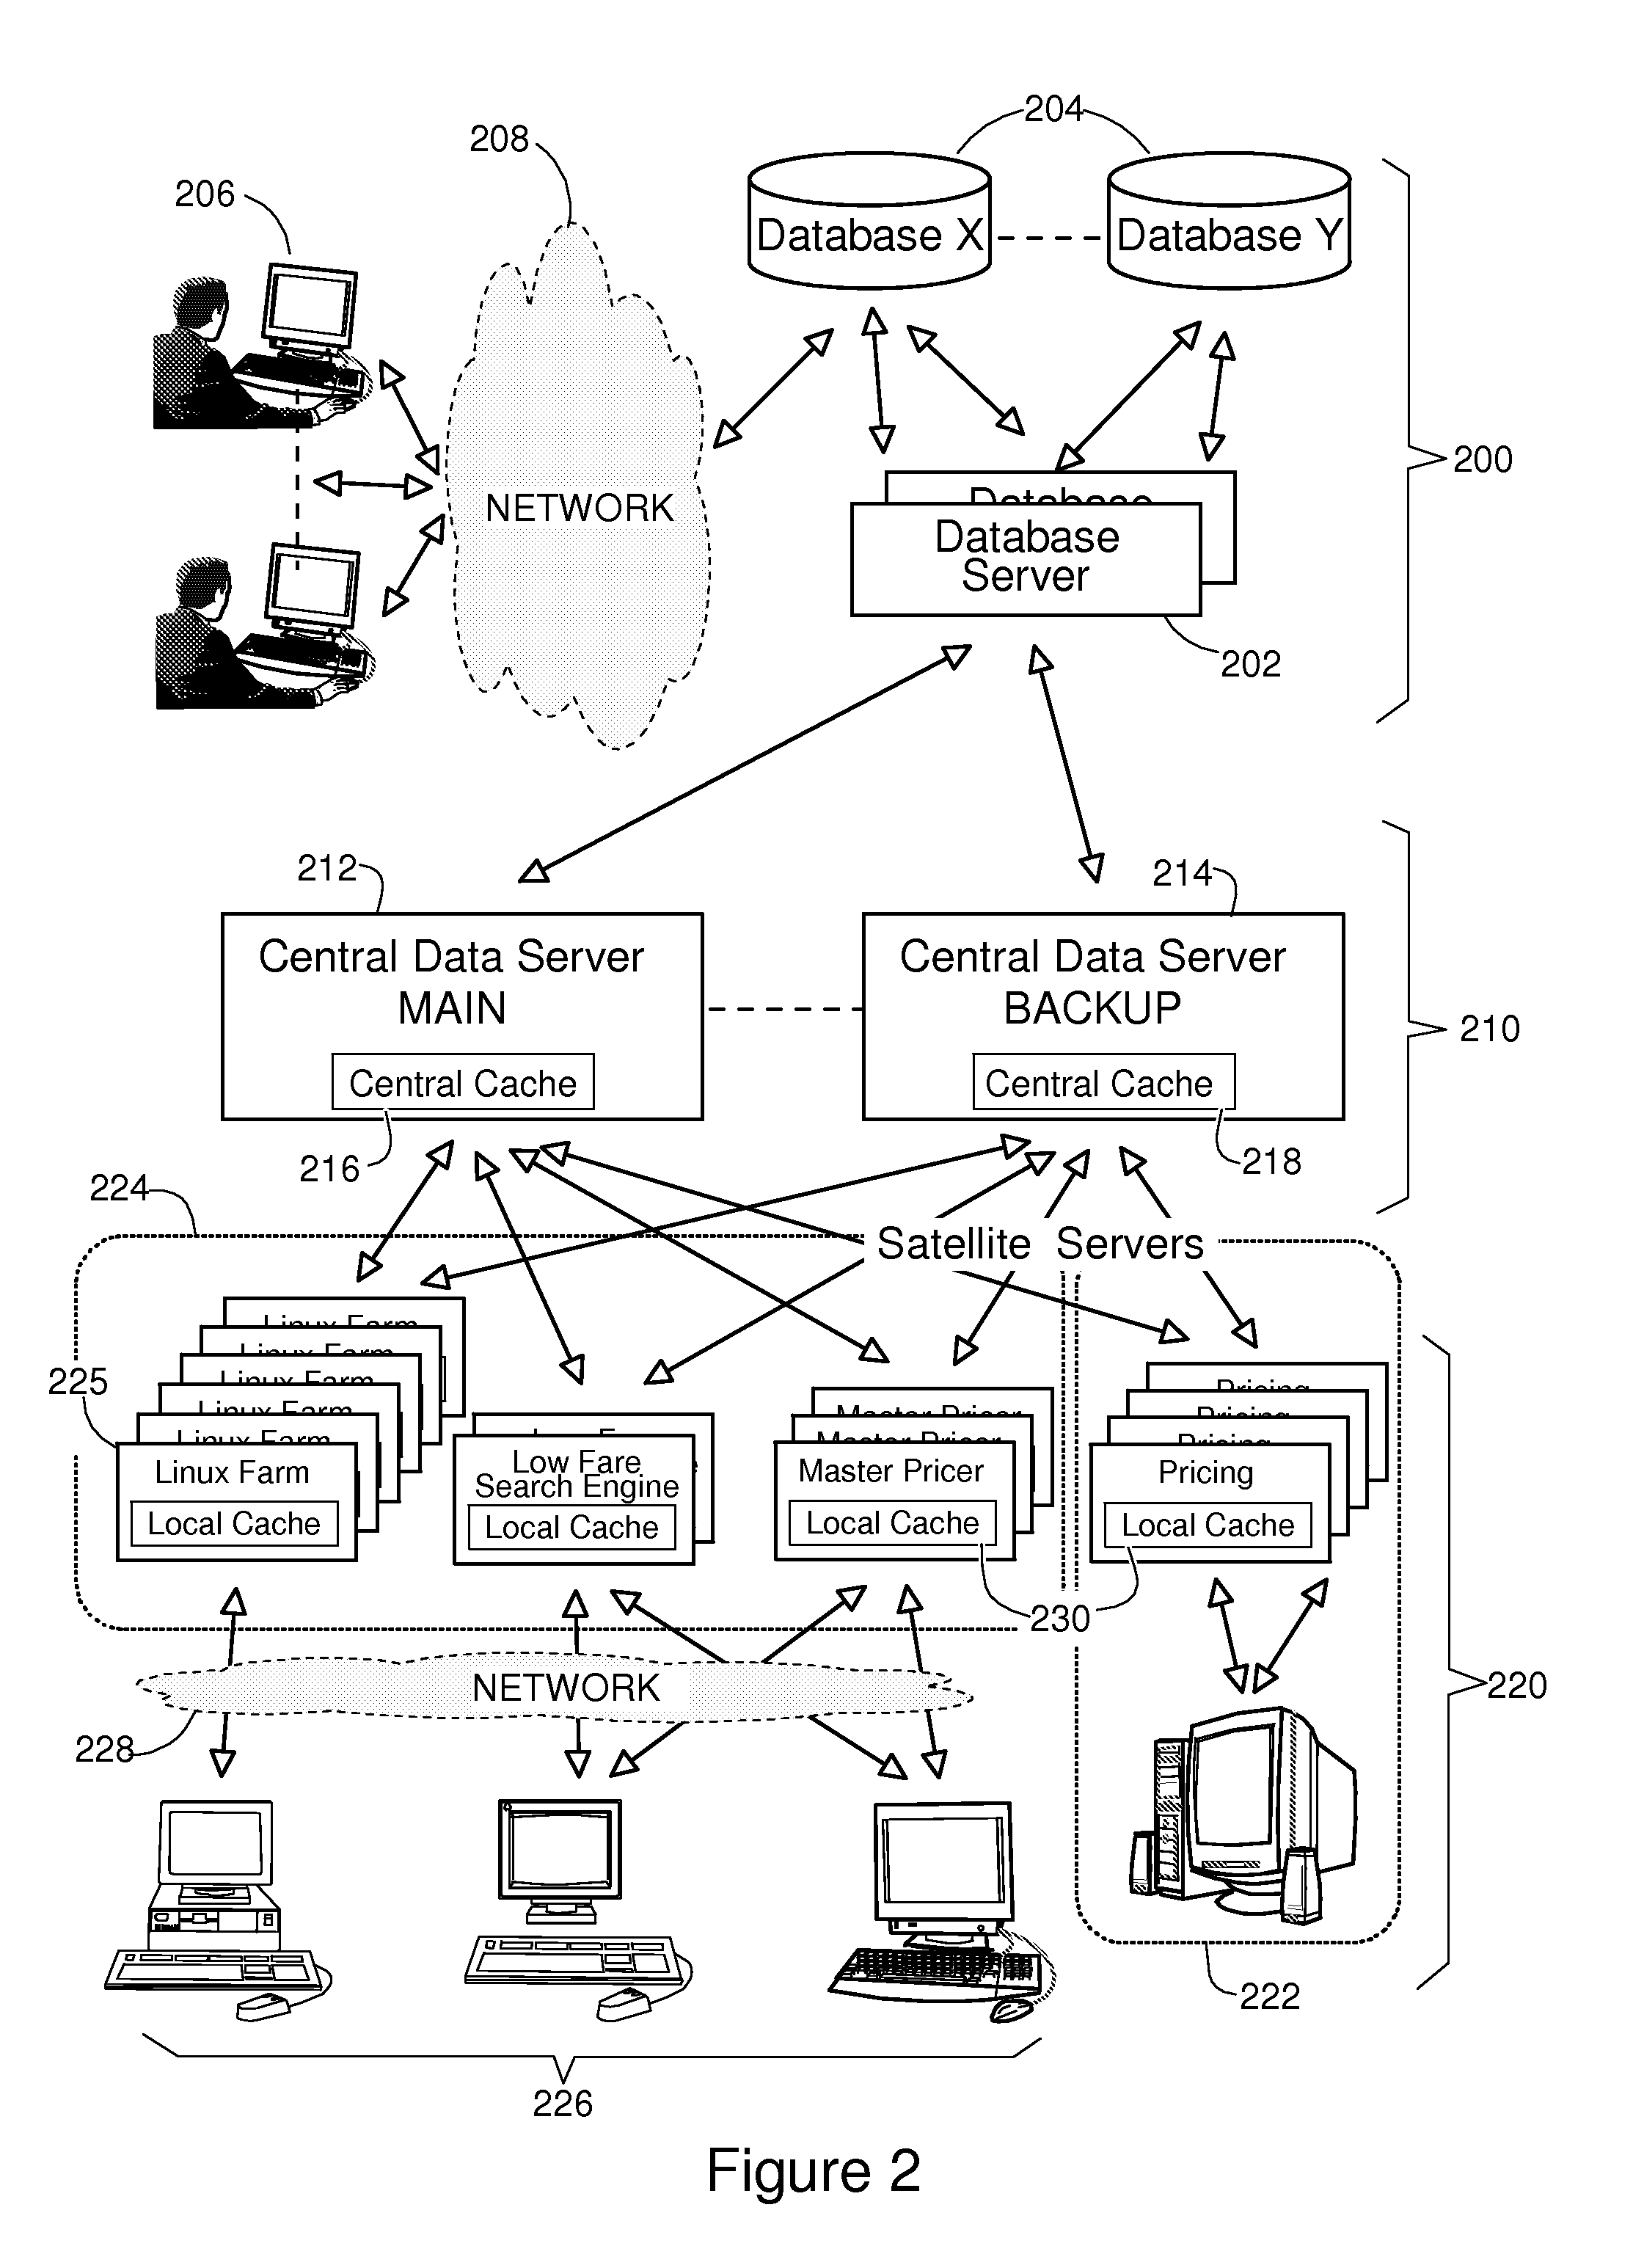 System and Method to Maintain Coherence of Cache Contents in a Multi-Tier System Aimed at Interfacing Large Databases